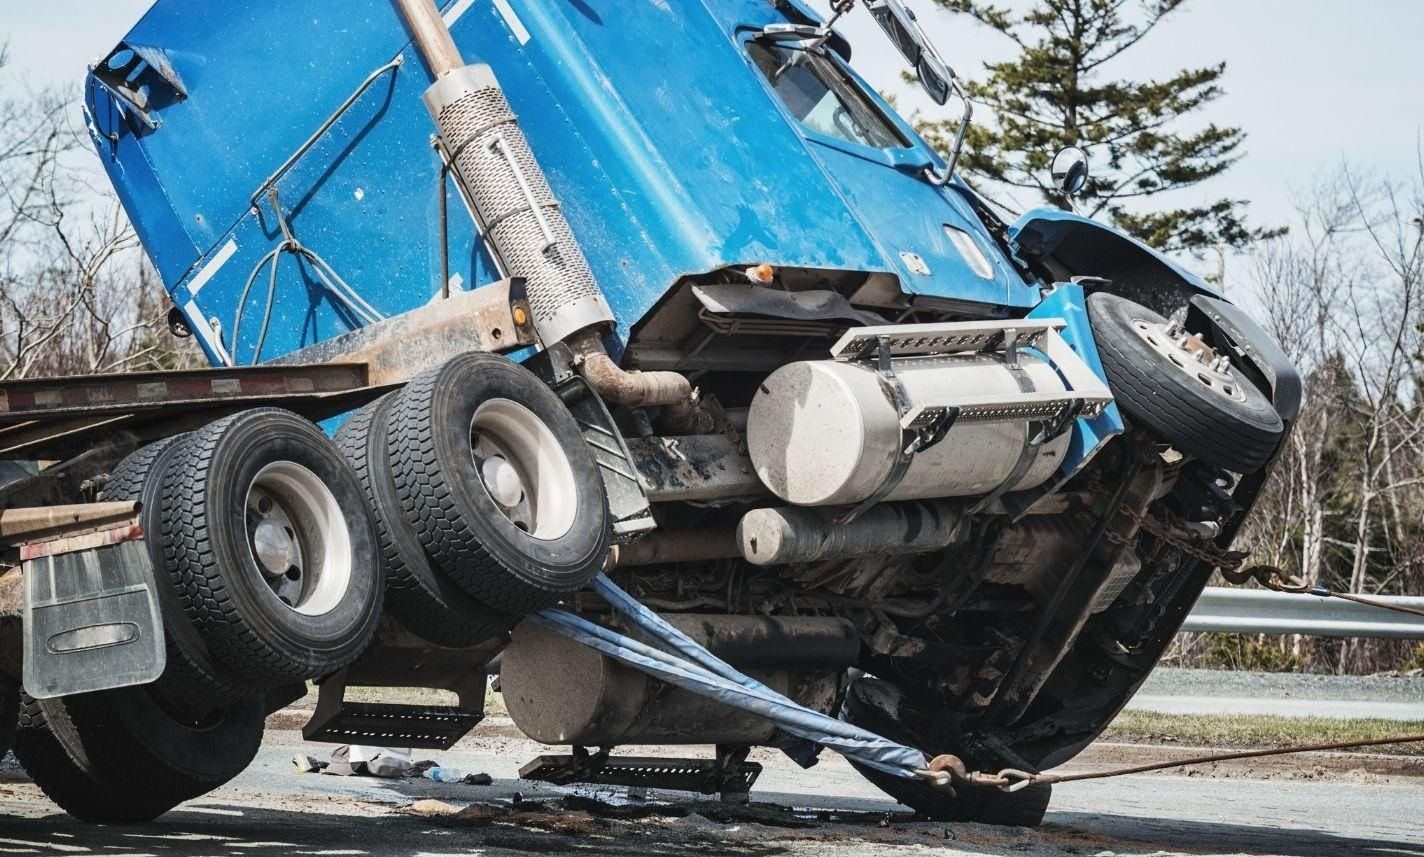 richland-commercial-truck-accident-injury-lawyer